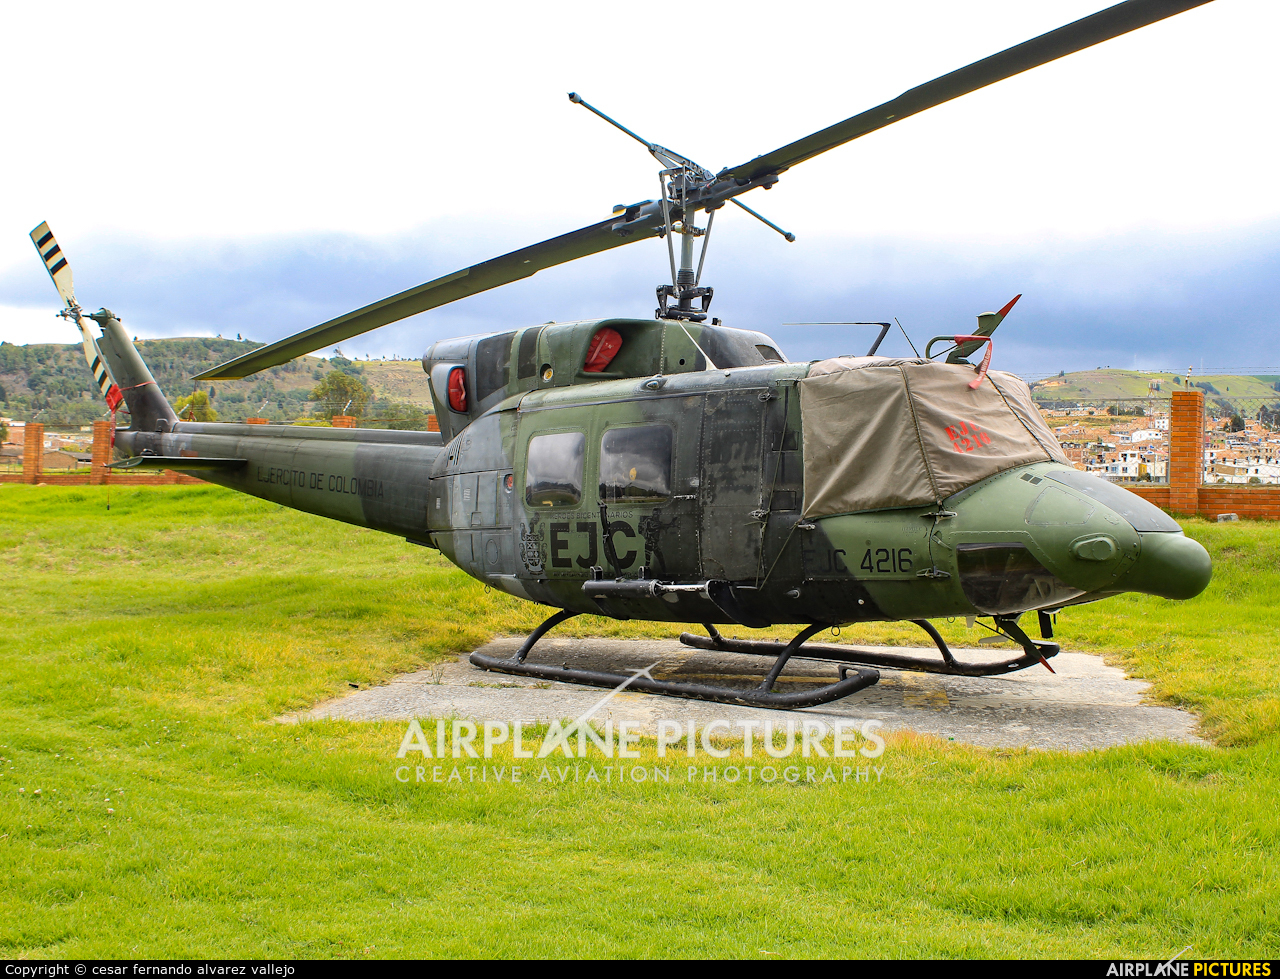 Colombia - Army EJC4216 aircraft at Off Airport - Colombia